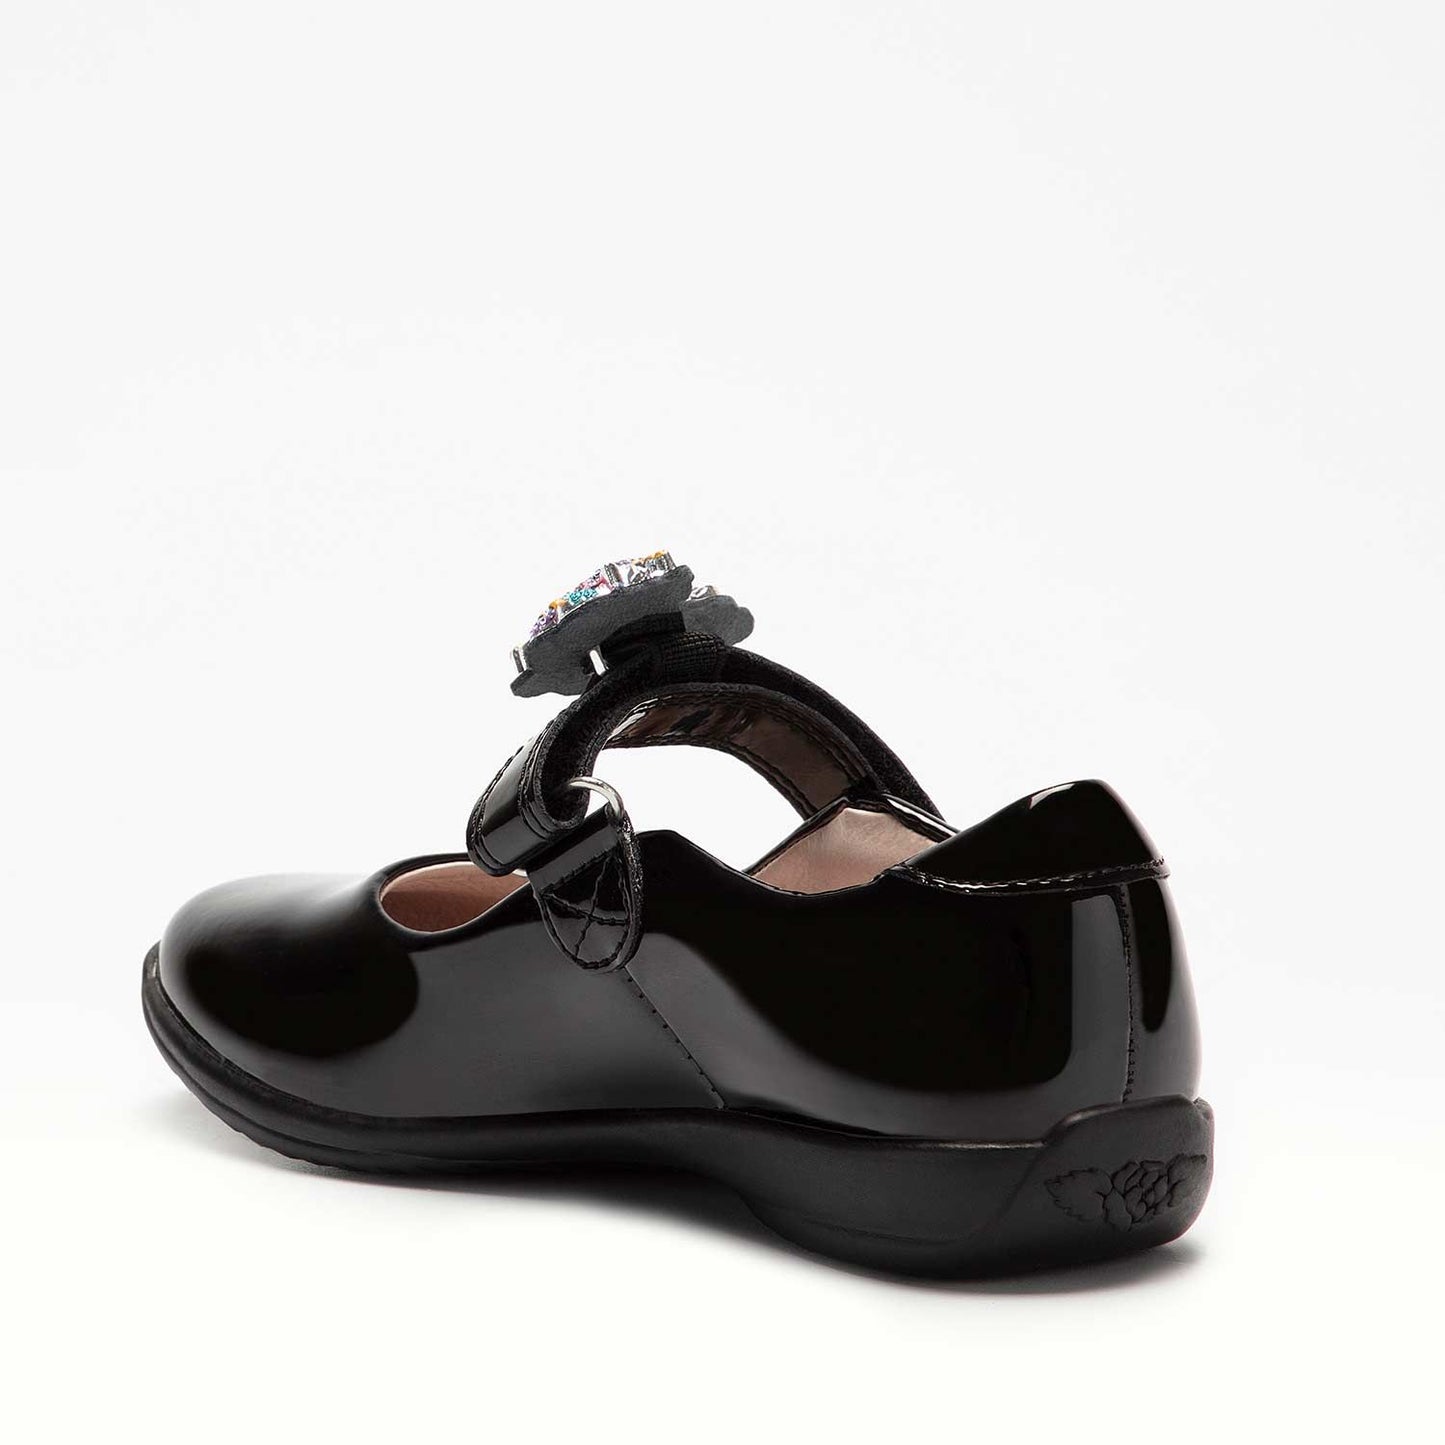 A girls Mary jane school shoe by Lelli Kelly, style Bella 2, in black patent with velcro fastening. Inner side view.